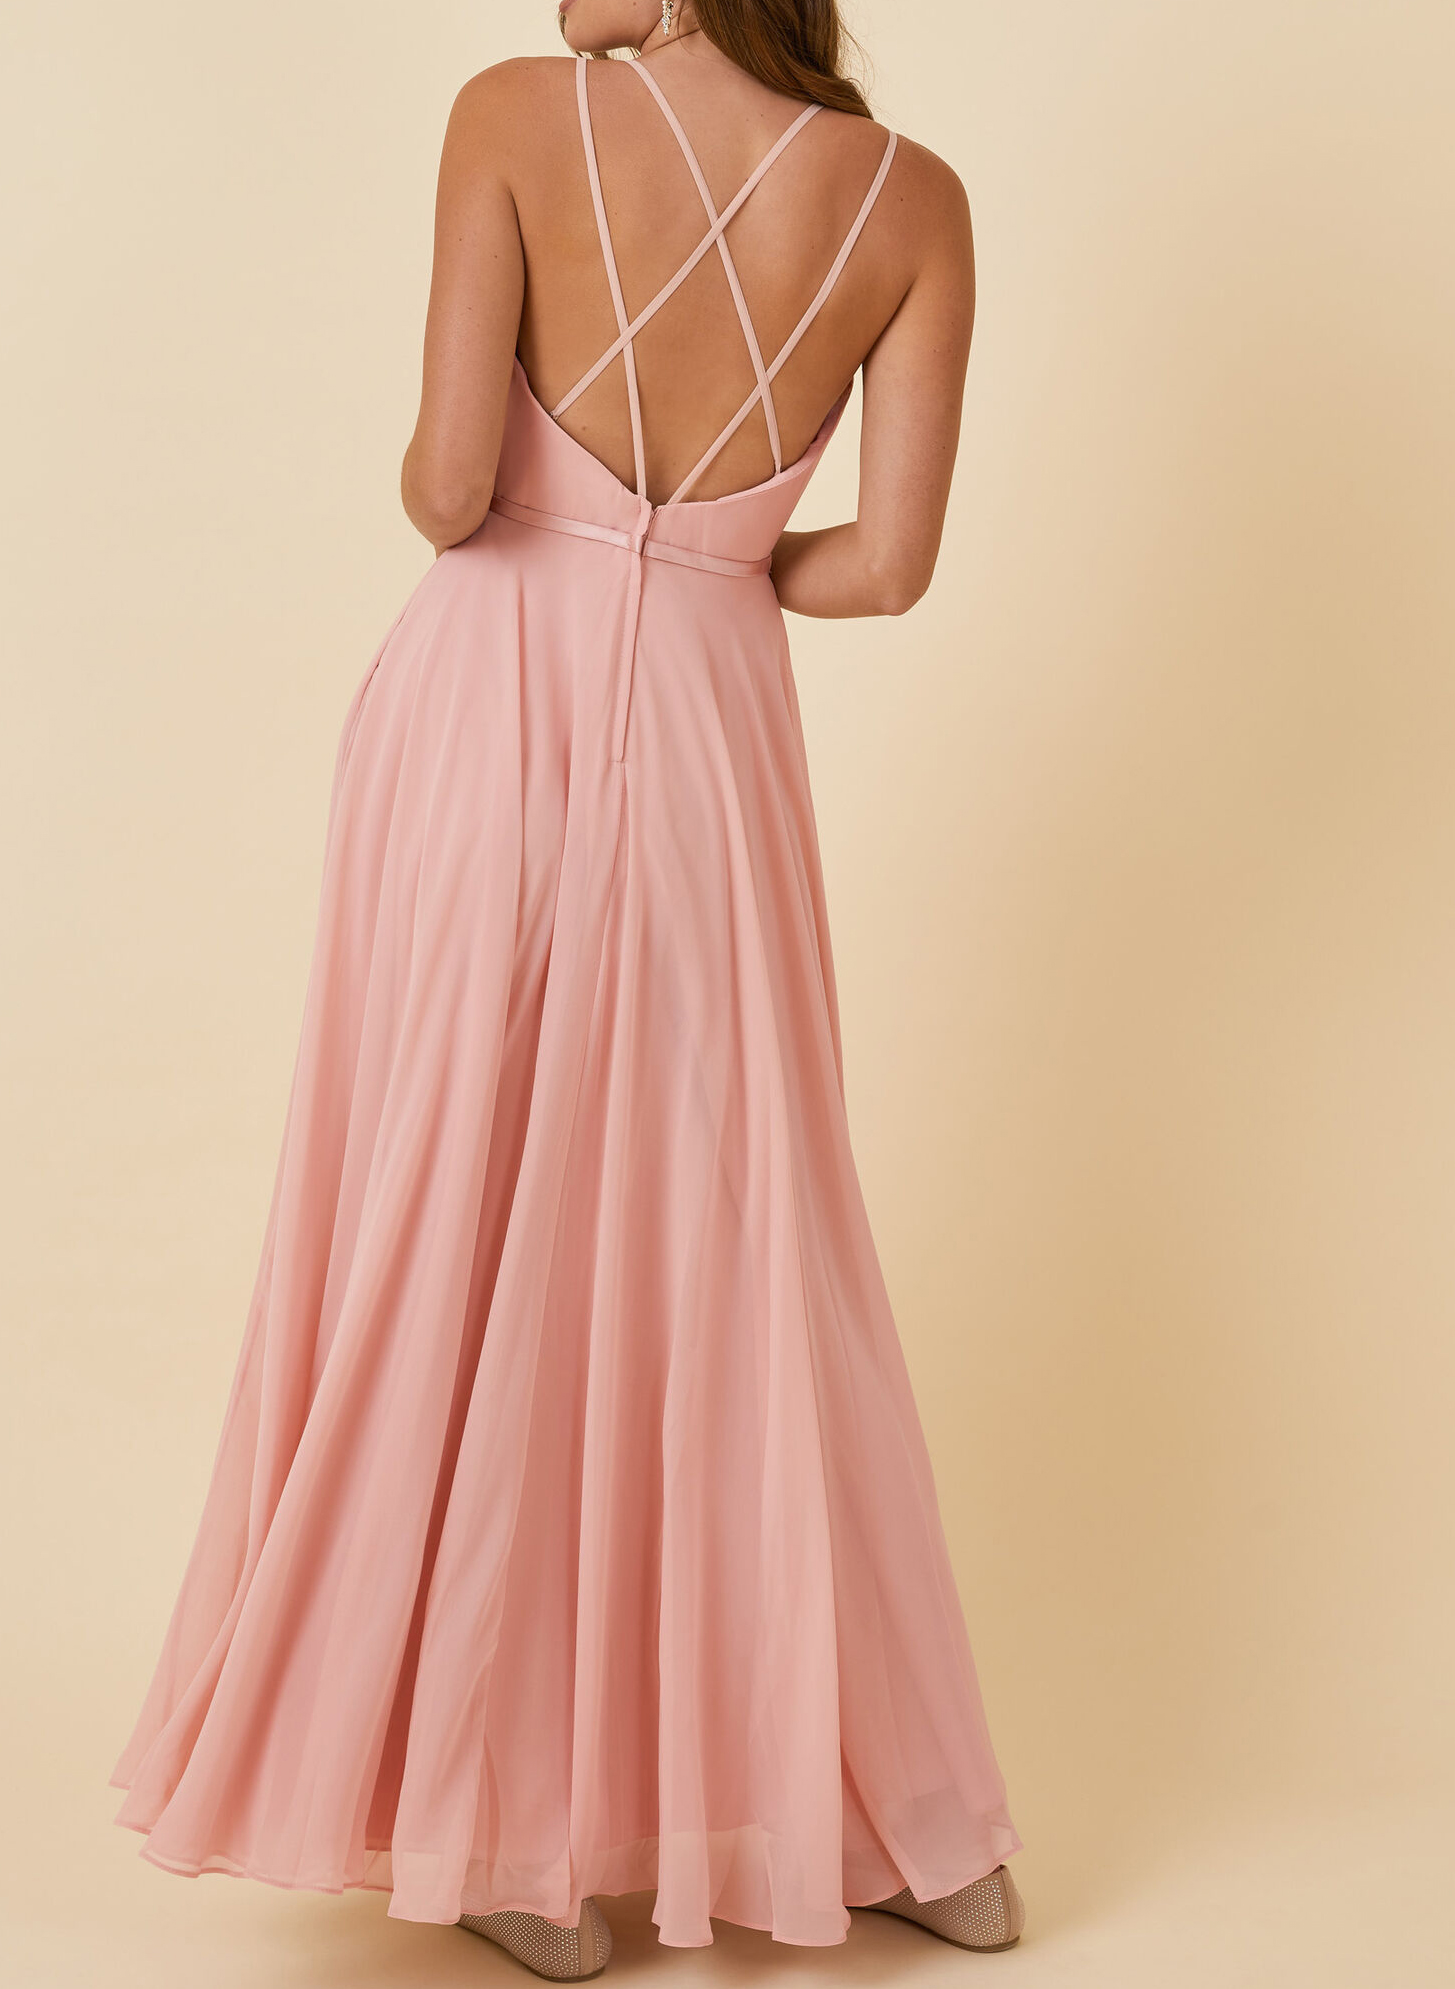 Pink Open Back A-Line Bridesmaid Dresses With V-neck 